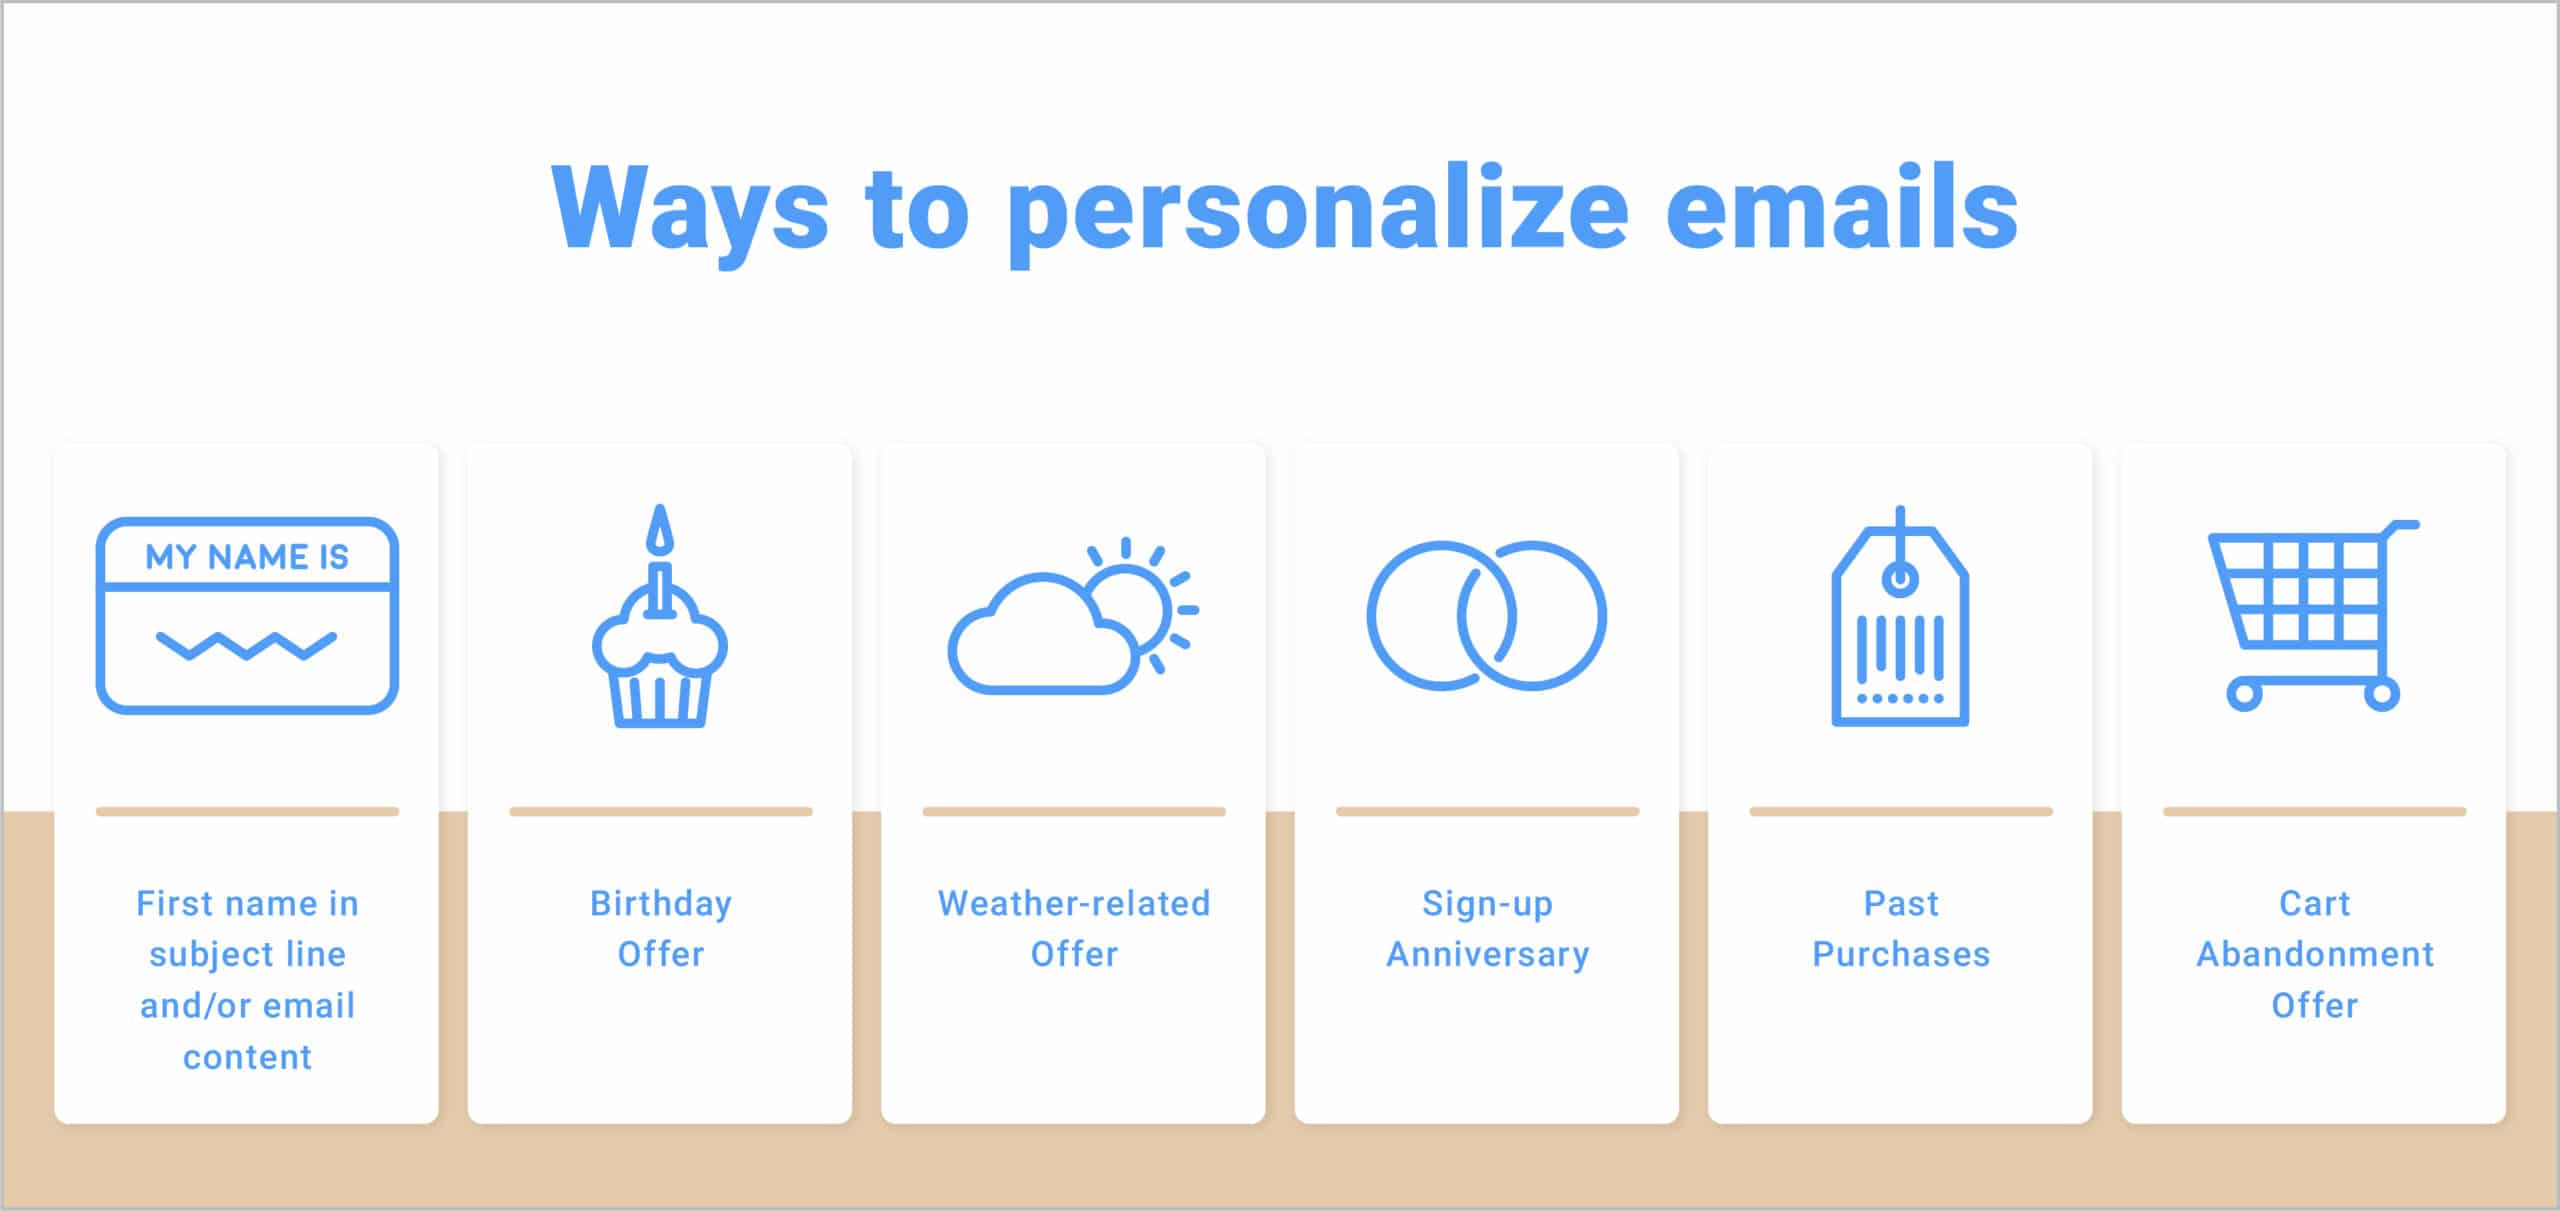 Graphic: "Ways to personalize emails" First name in subject line and/or email content; birthday offer; weather-related offer; sign-up anniversary; past purchases; cart abandonment offer